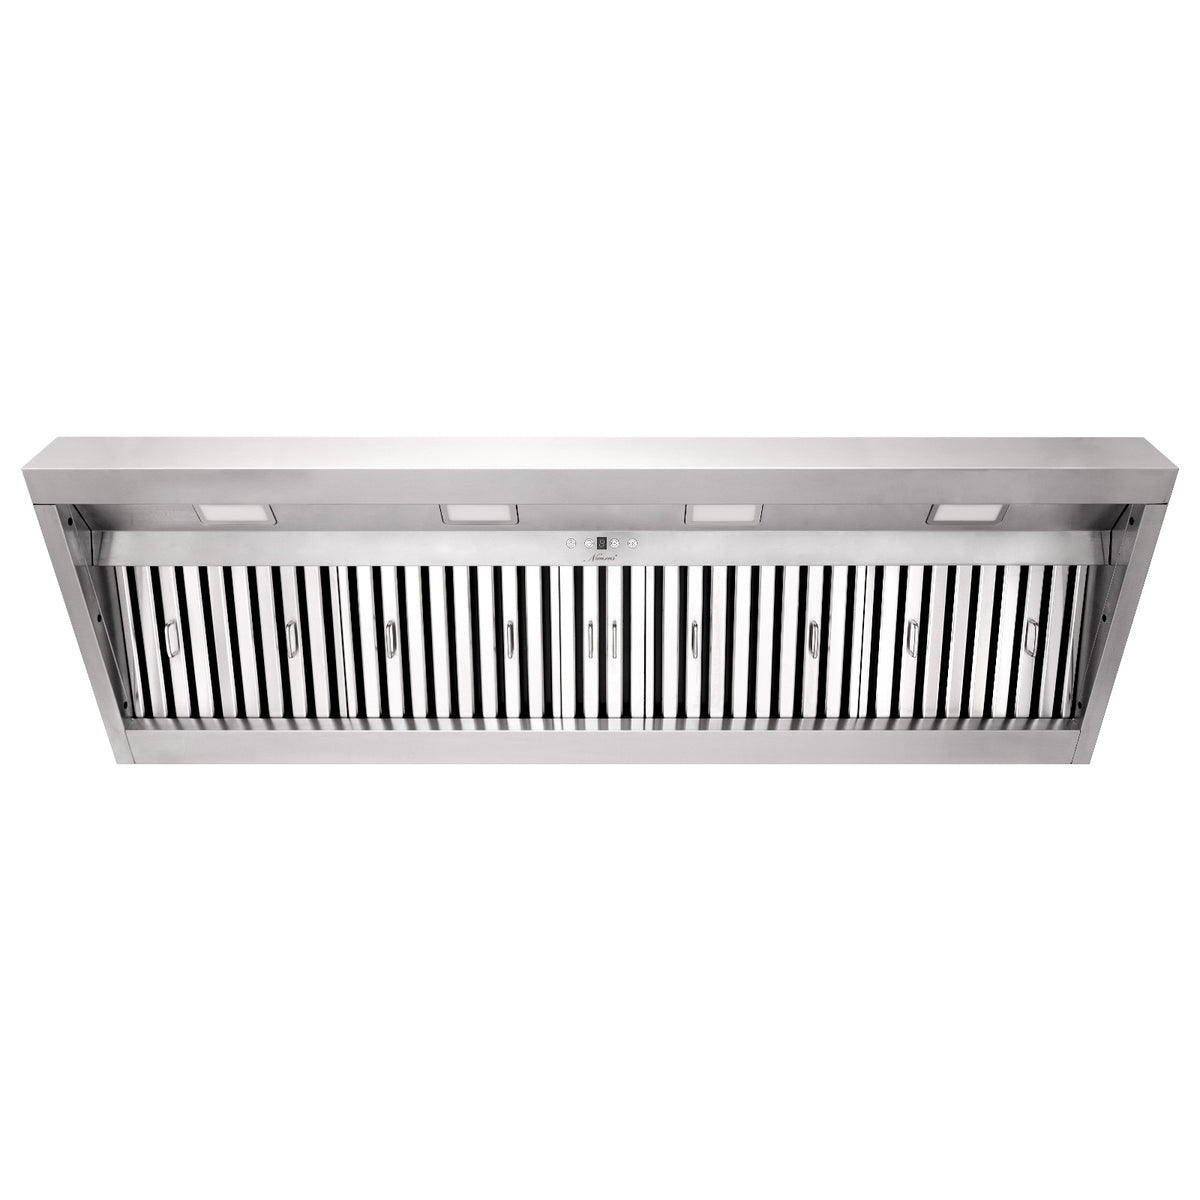 60 Inch Insert/Built-in Range Hood, Ultra Quiet, Powerful Suction Stainless Steel 8'' Duct Kitchen Vent Hood with Dimmable LED Light, 4-Speeds 1200CFM